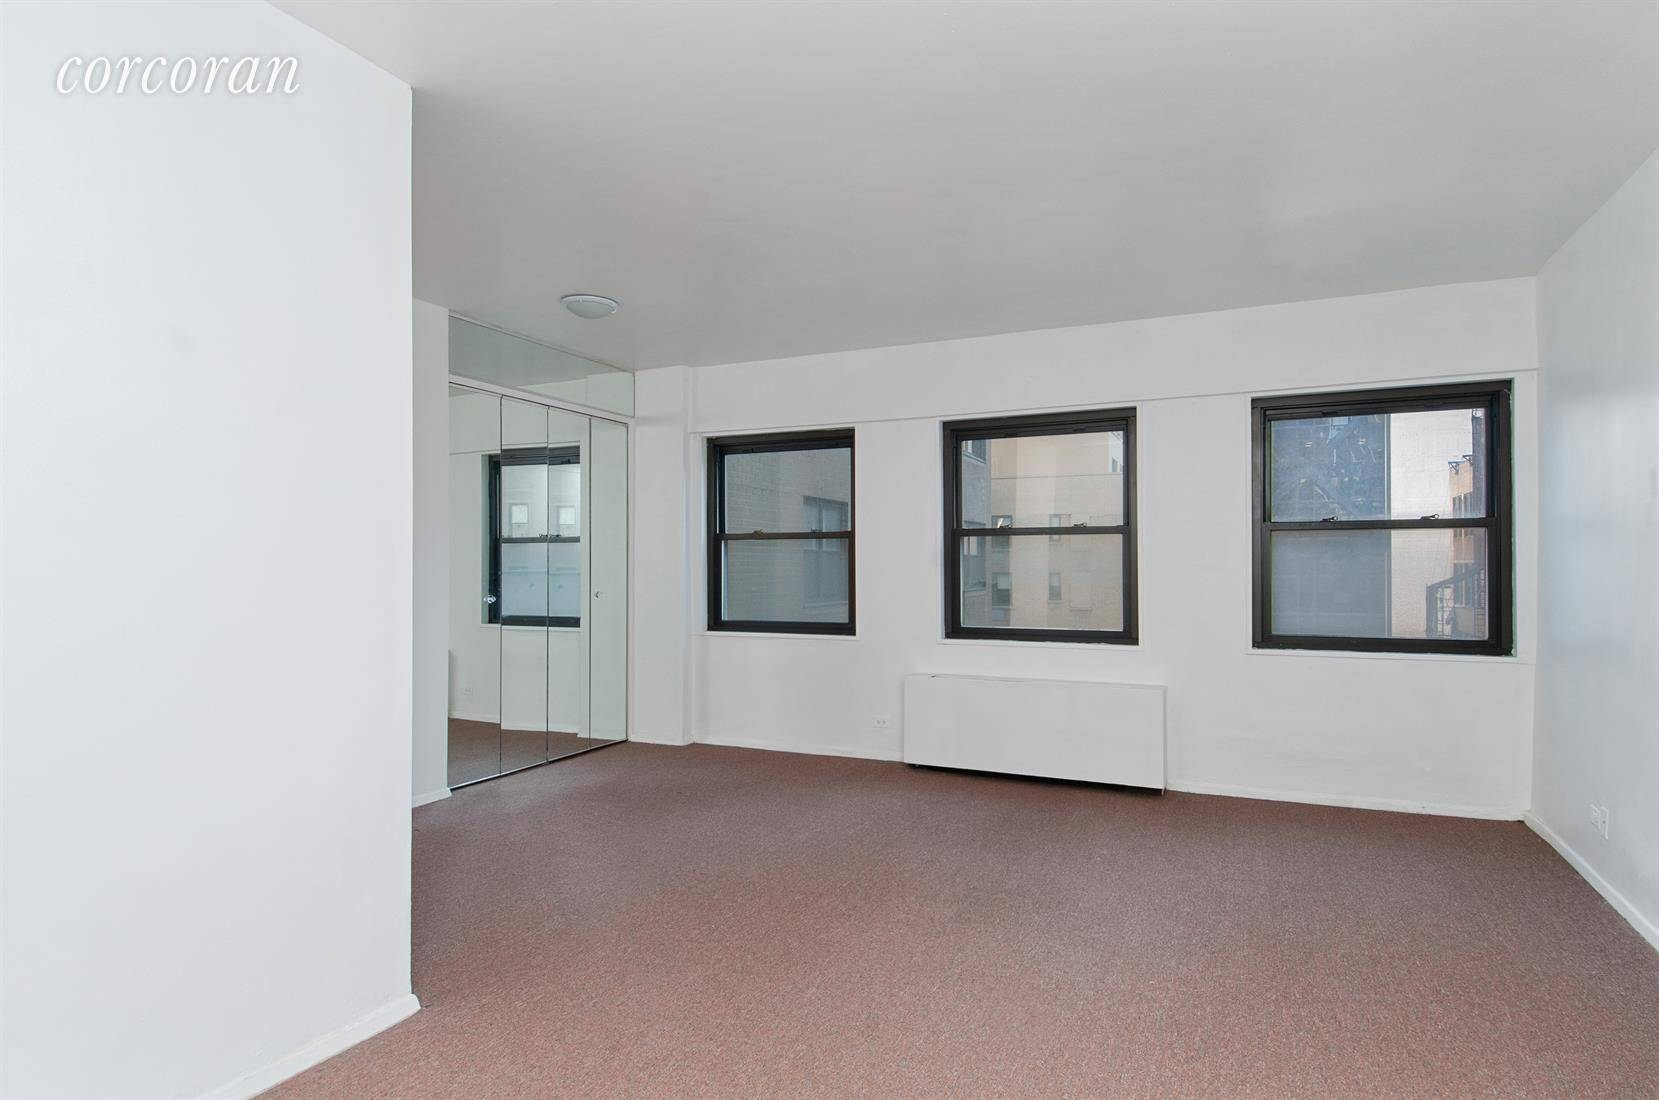 Huge Alcove Studio in Tower 58 Condo located in New York most prestigious block that is home to The Plaza Hotel.